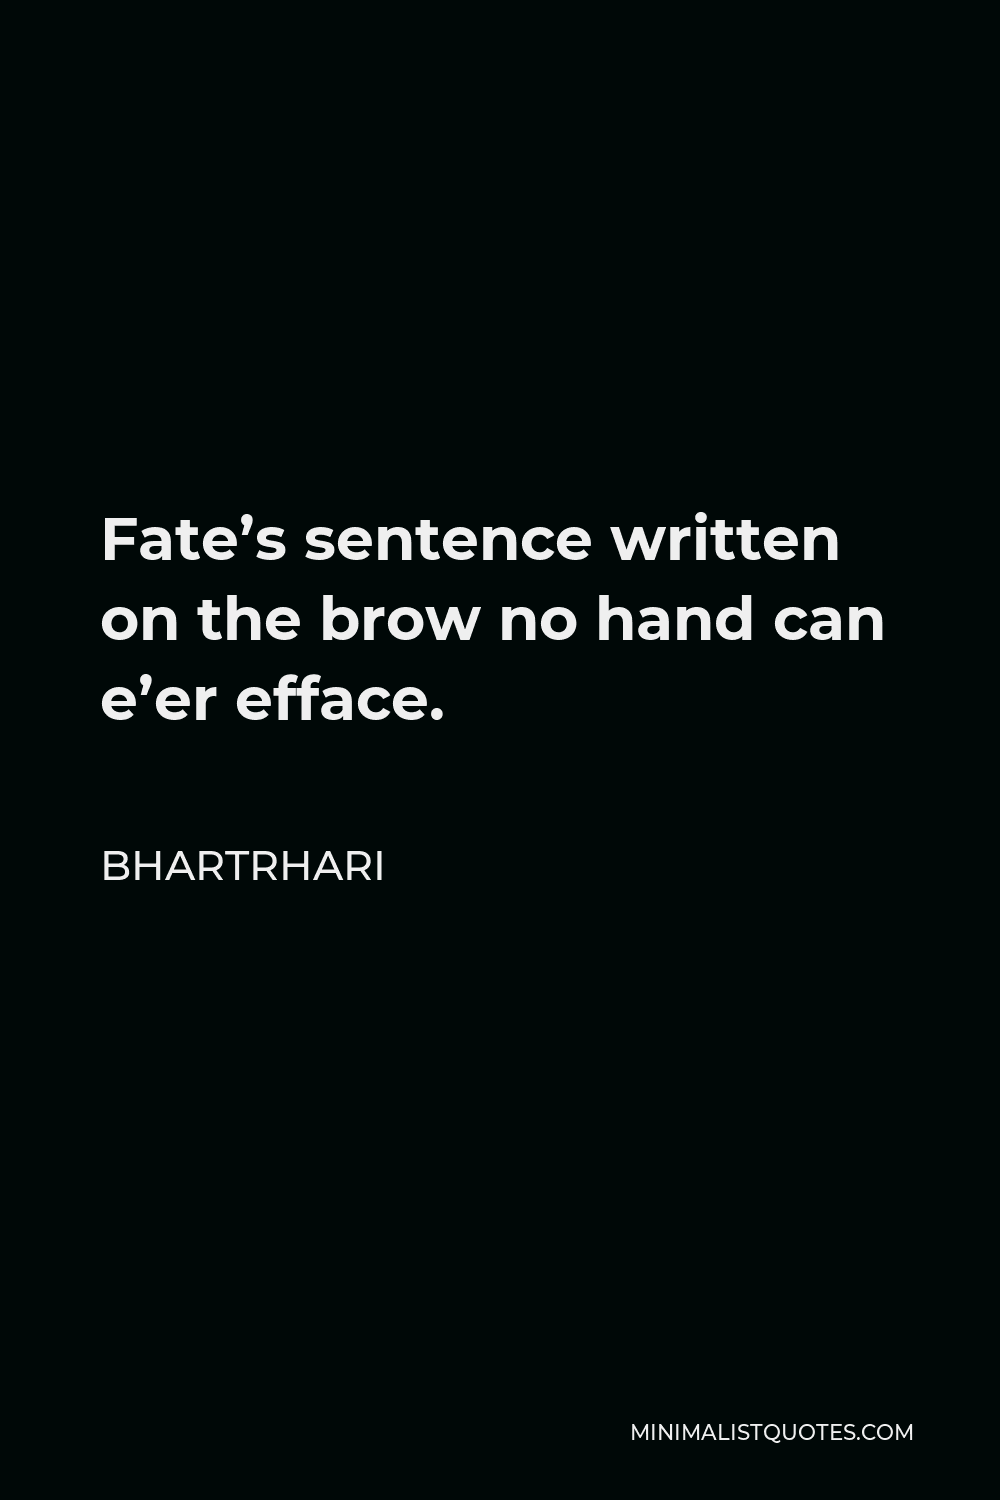 Bhartrhari Quote - Fate’s sentence written on the brow no hand can e’er efface.